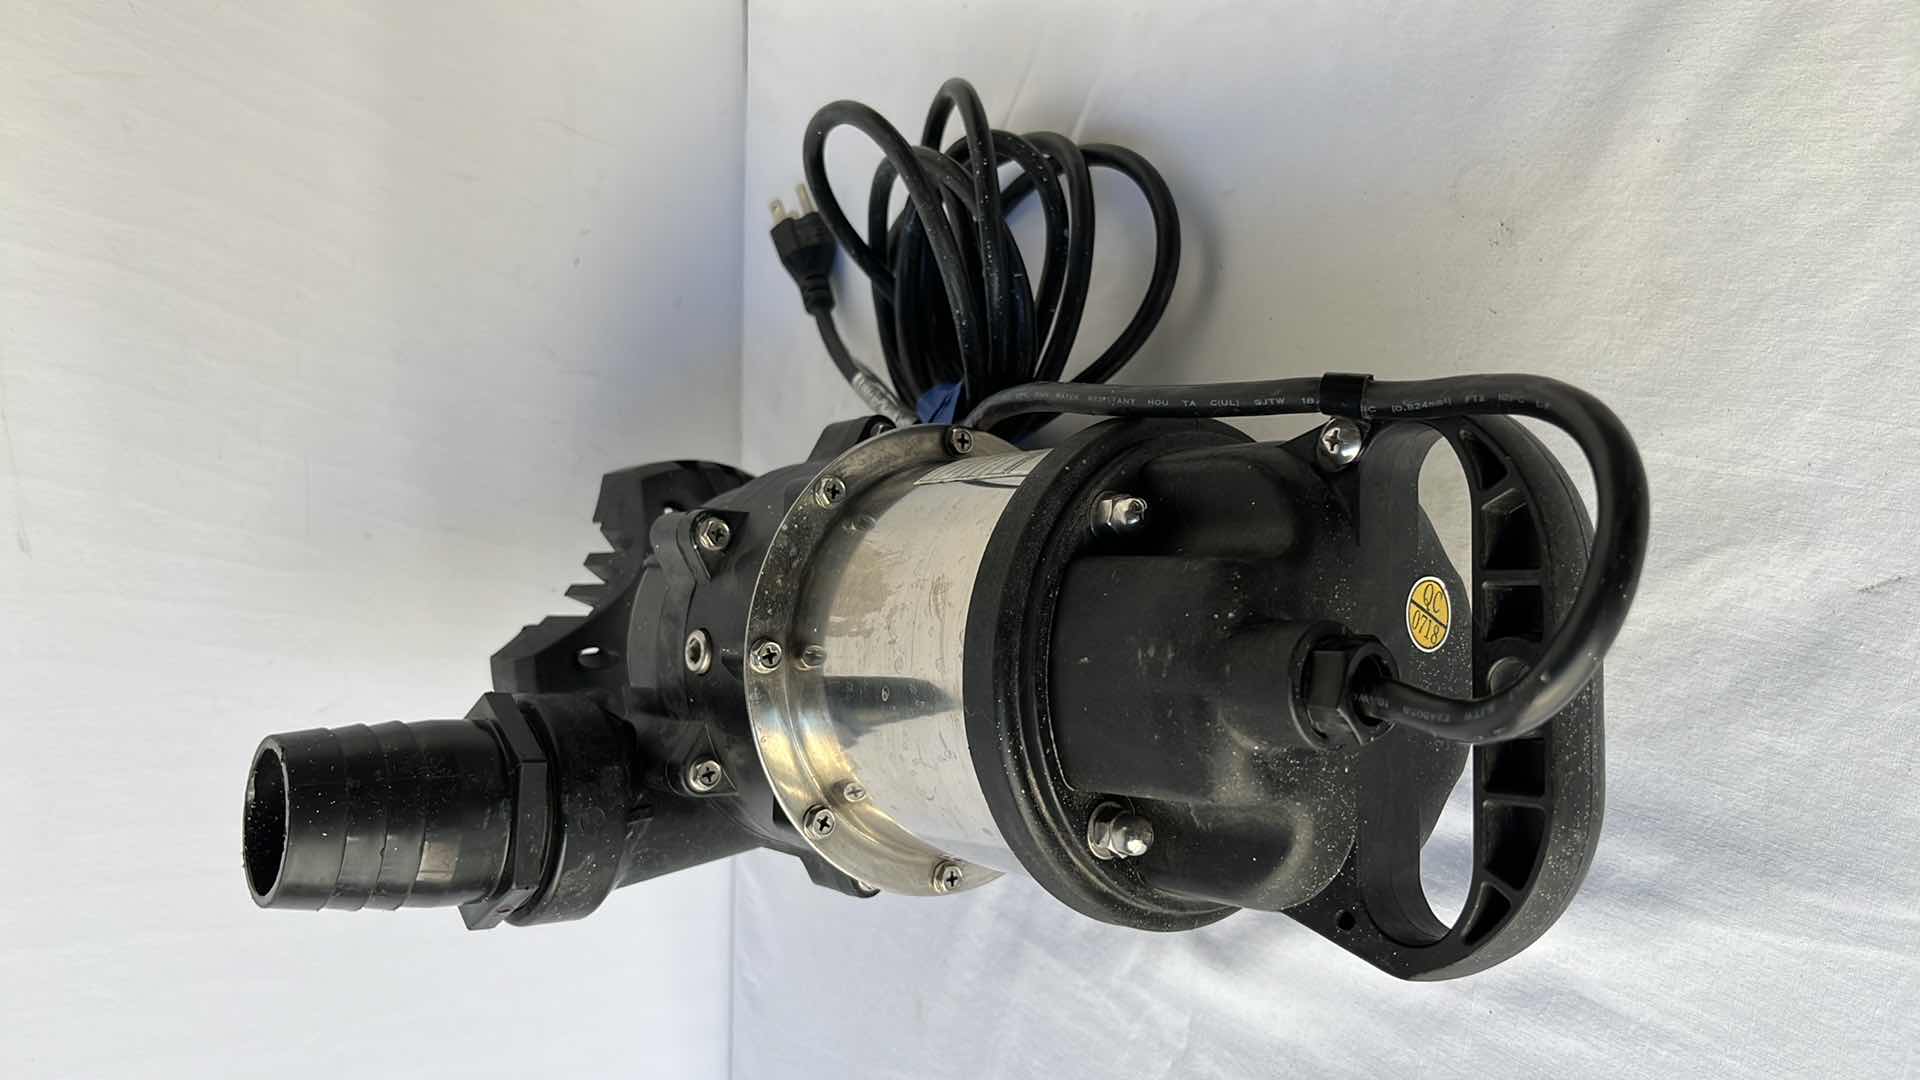 Photo 2 of 1/2HP SUBM. WATERFALL PUMP
CONTINUOUS DUTY 115V (MODEL 300910)